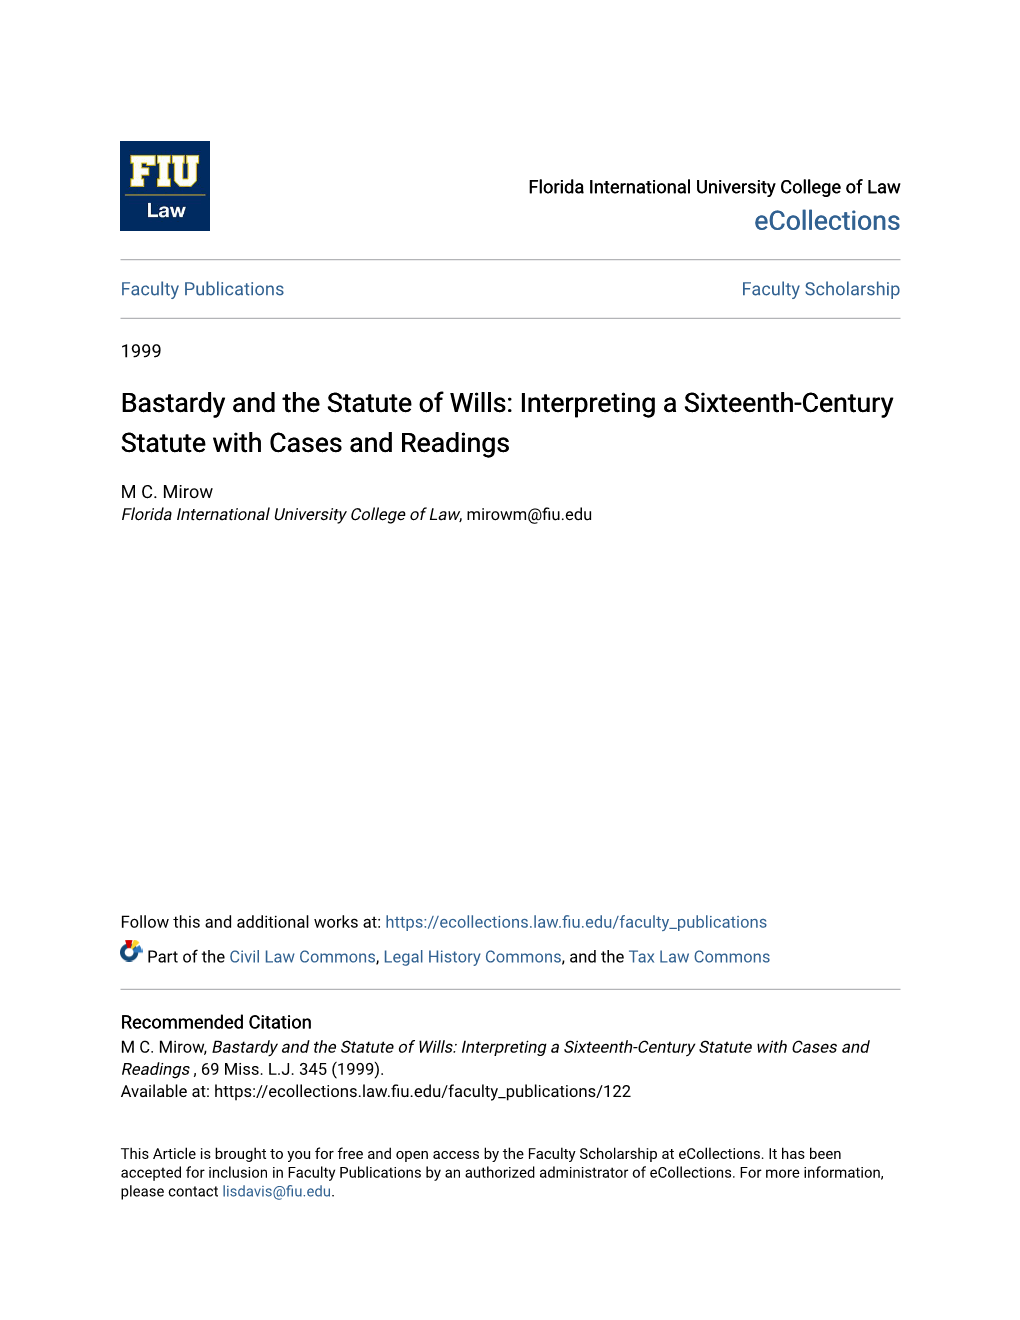 Bastardy and the Statute of Wills: Interpreting a Sixteenth-Century Statute with Cases and Readings